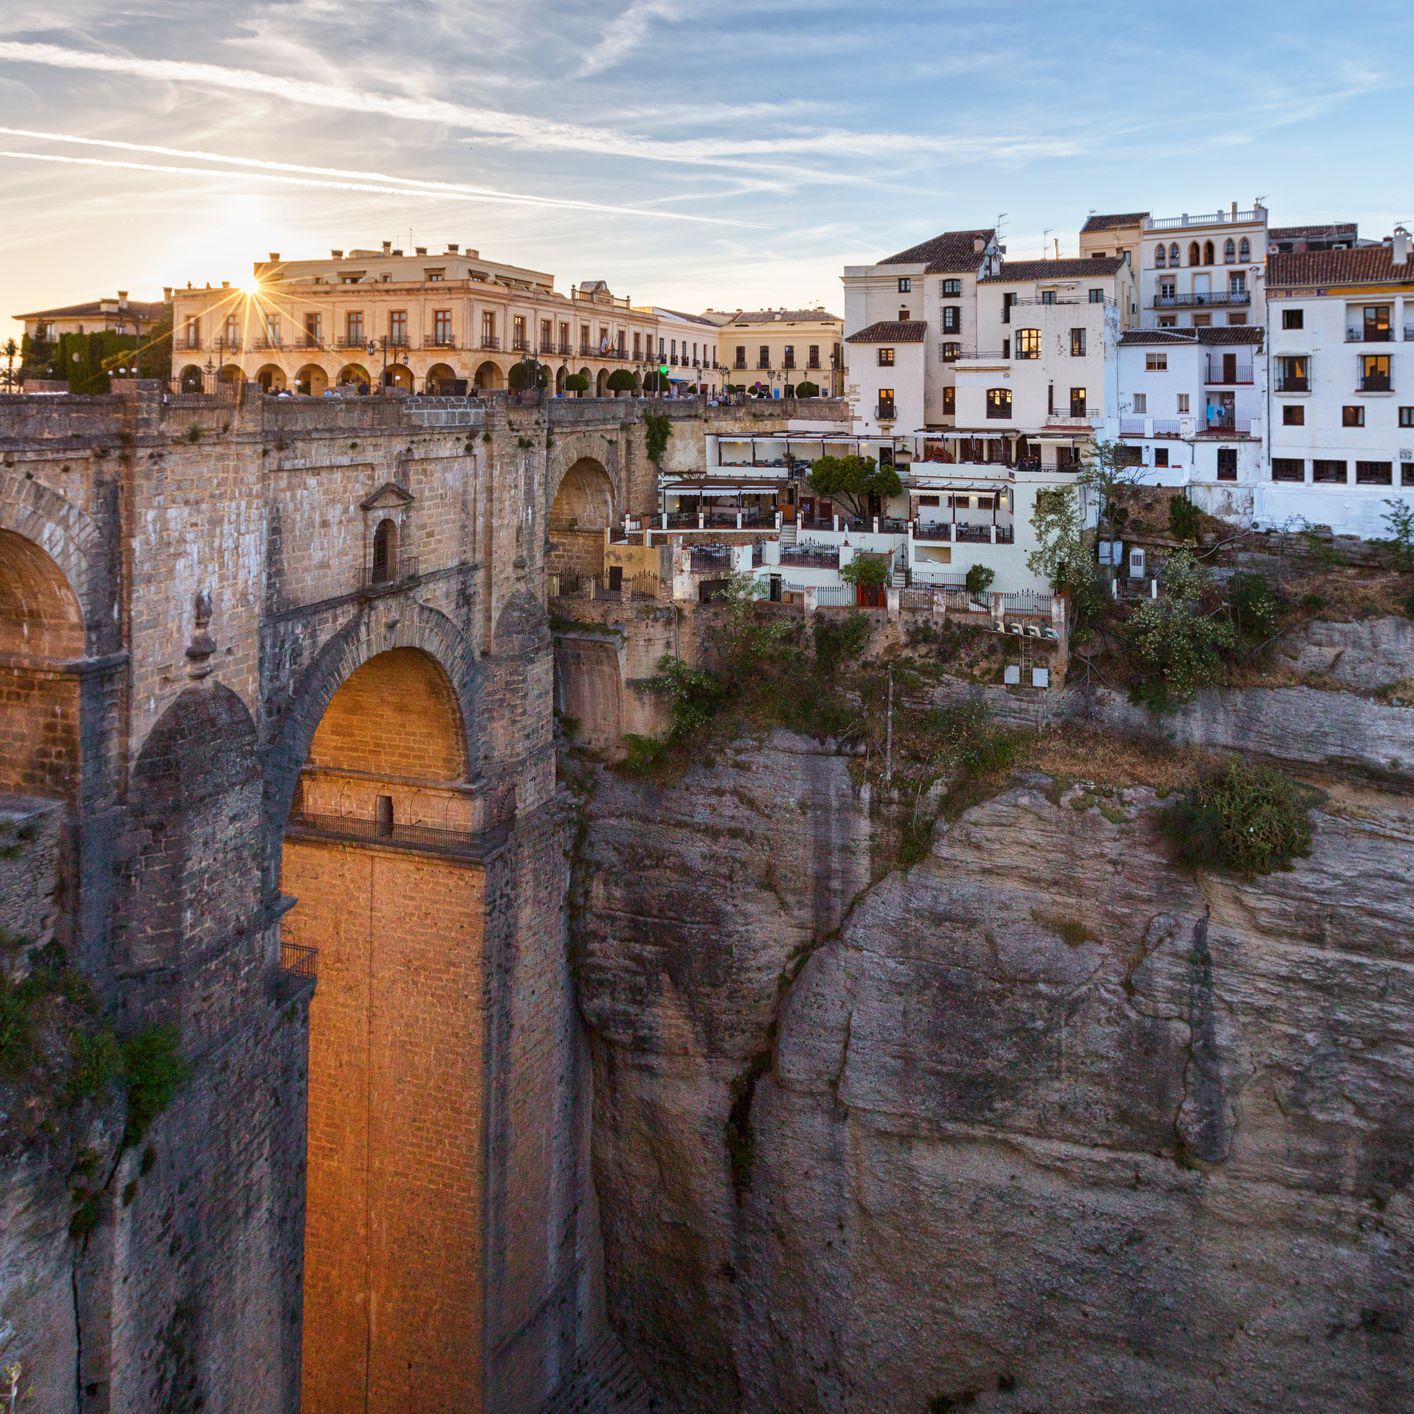 Ronda - A Town City Known As City Of Dreams In Spain